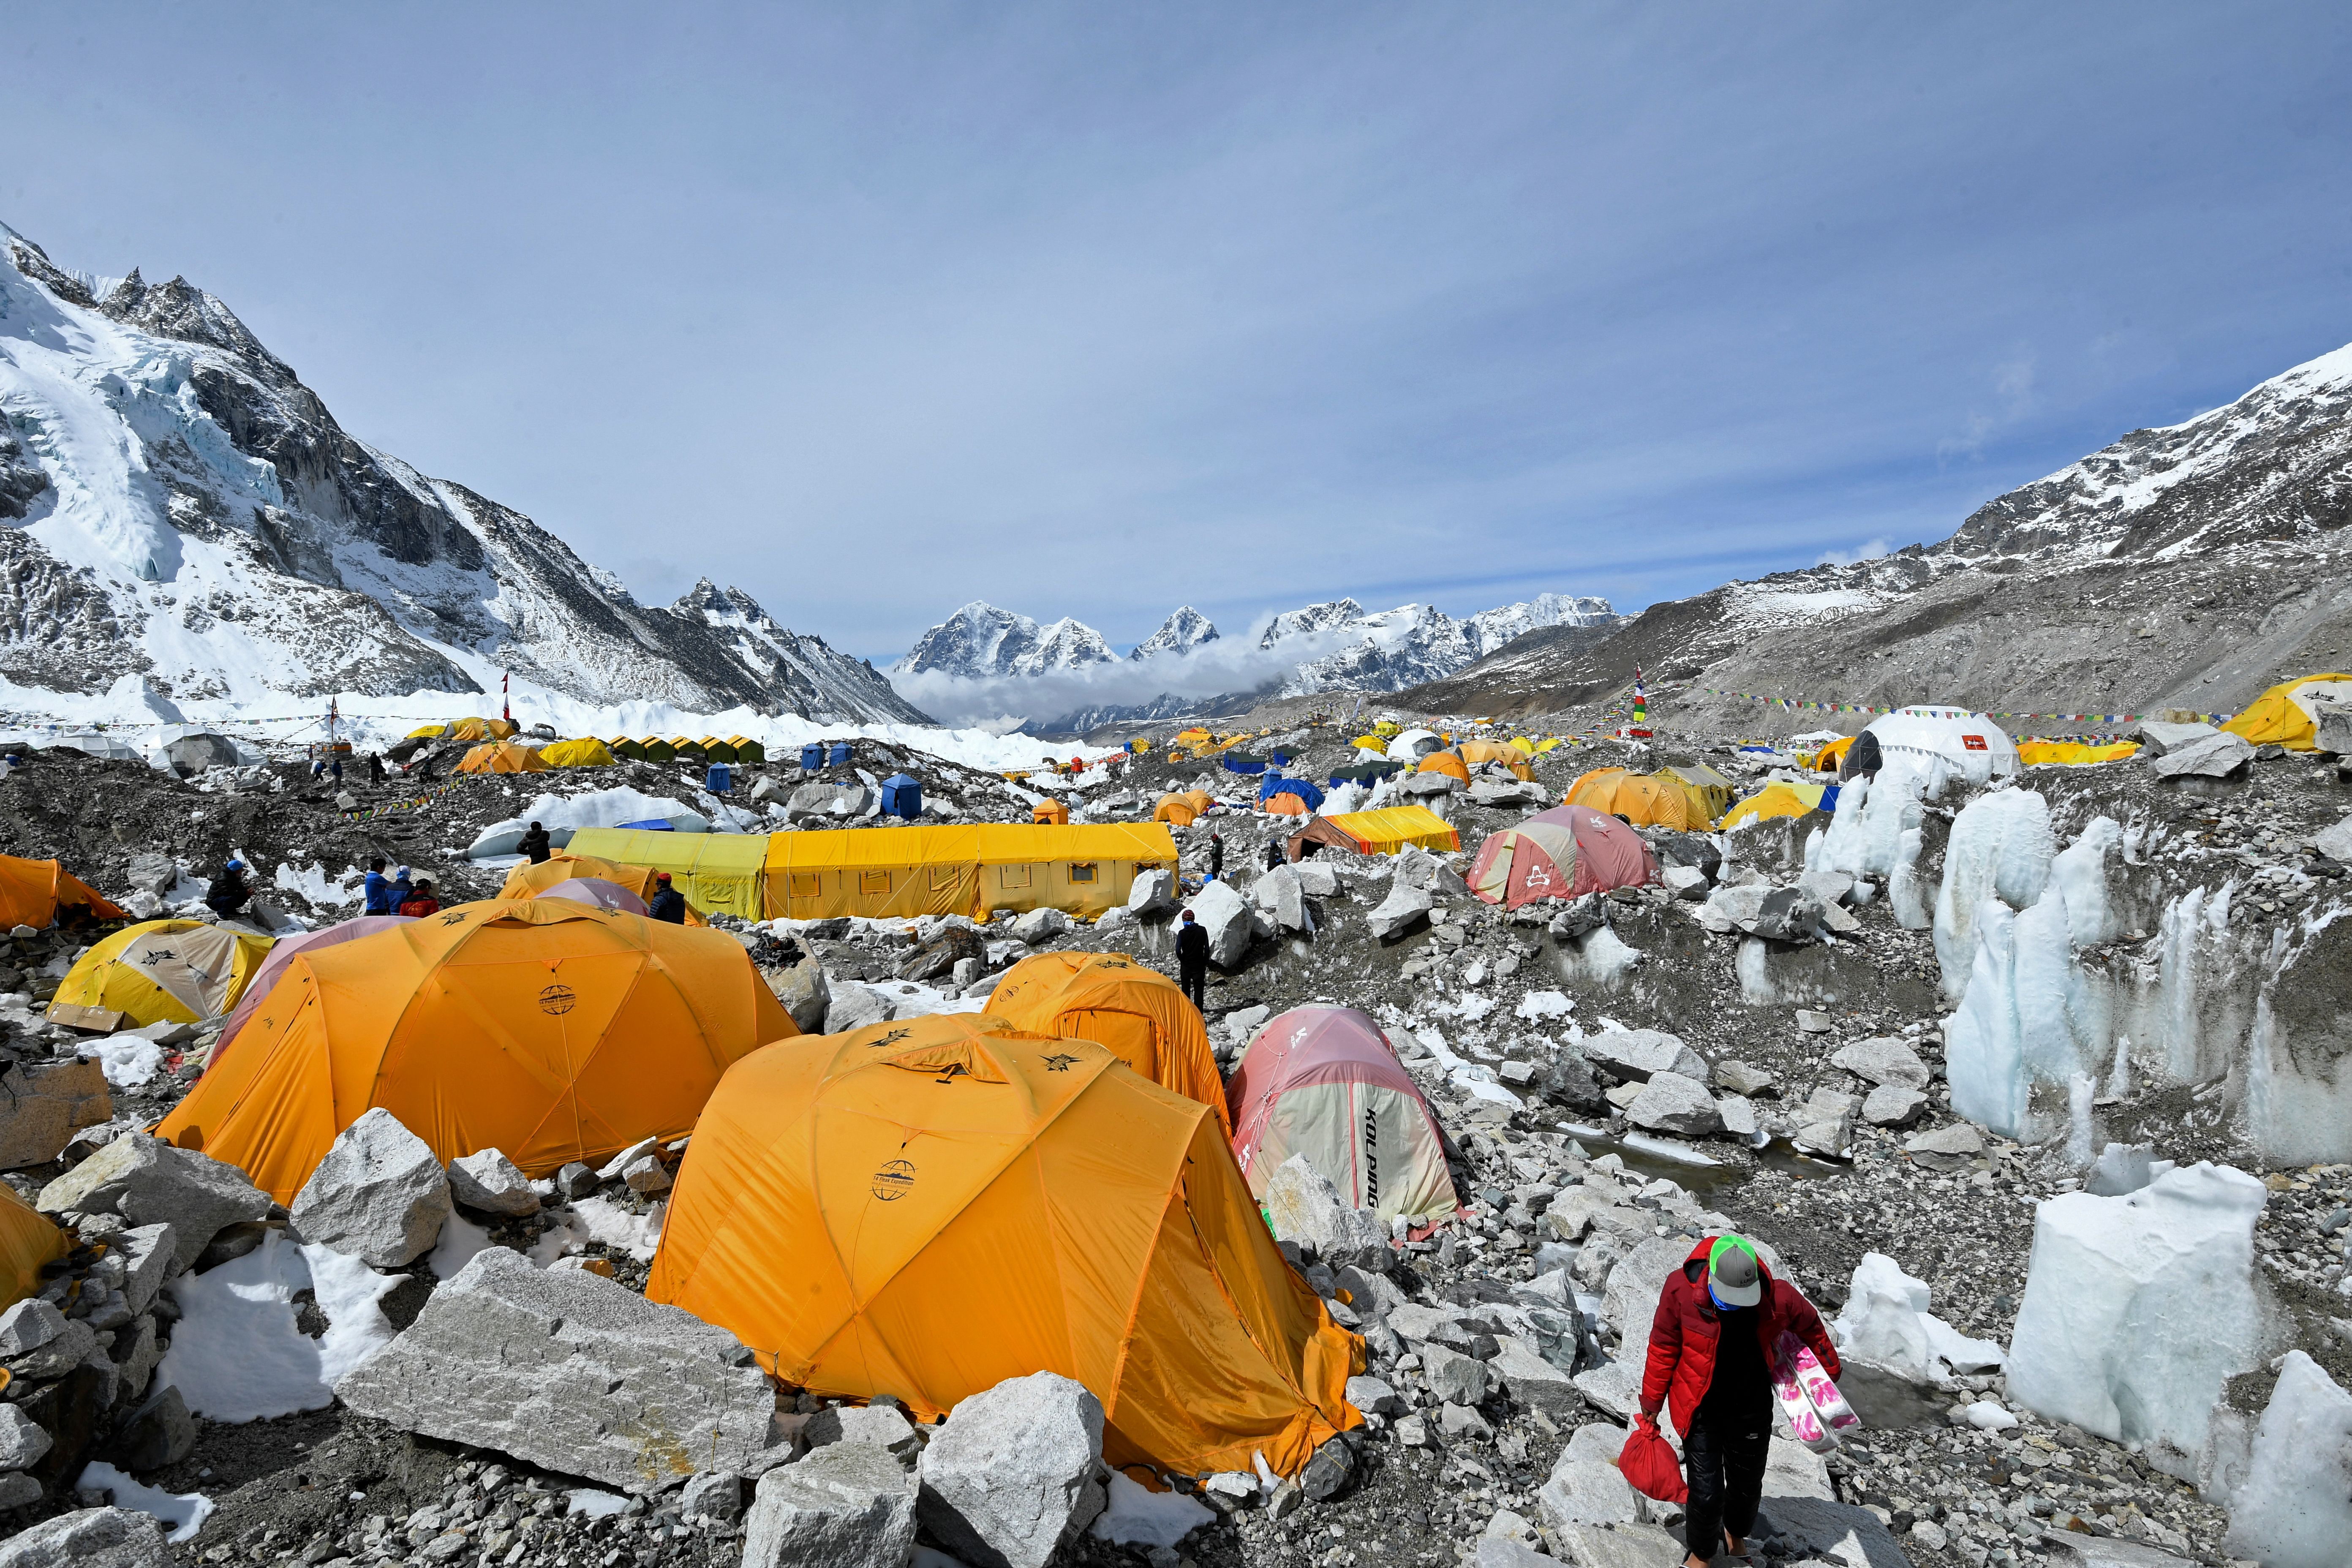 Tents of mountaineers are pictured at the Everest base camp in the Mount Everest region of Solukhumbu district on May 3, 2021. Nepal Mountaineering Association has asked climbers to bring back empty oxygen canisters amid the oxygen shortage in hospitals across country.